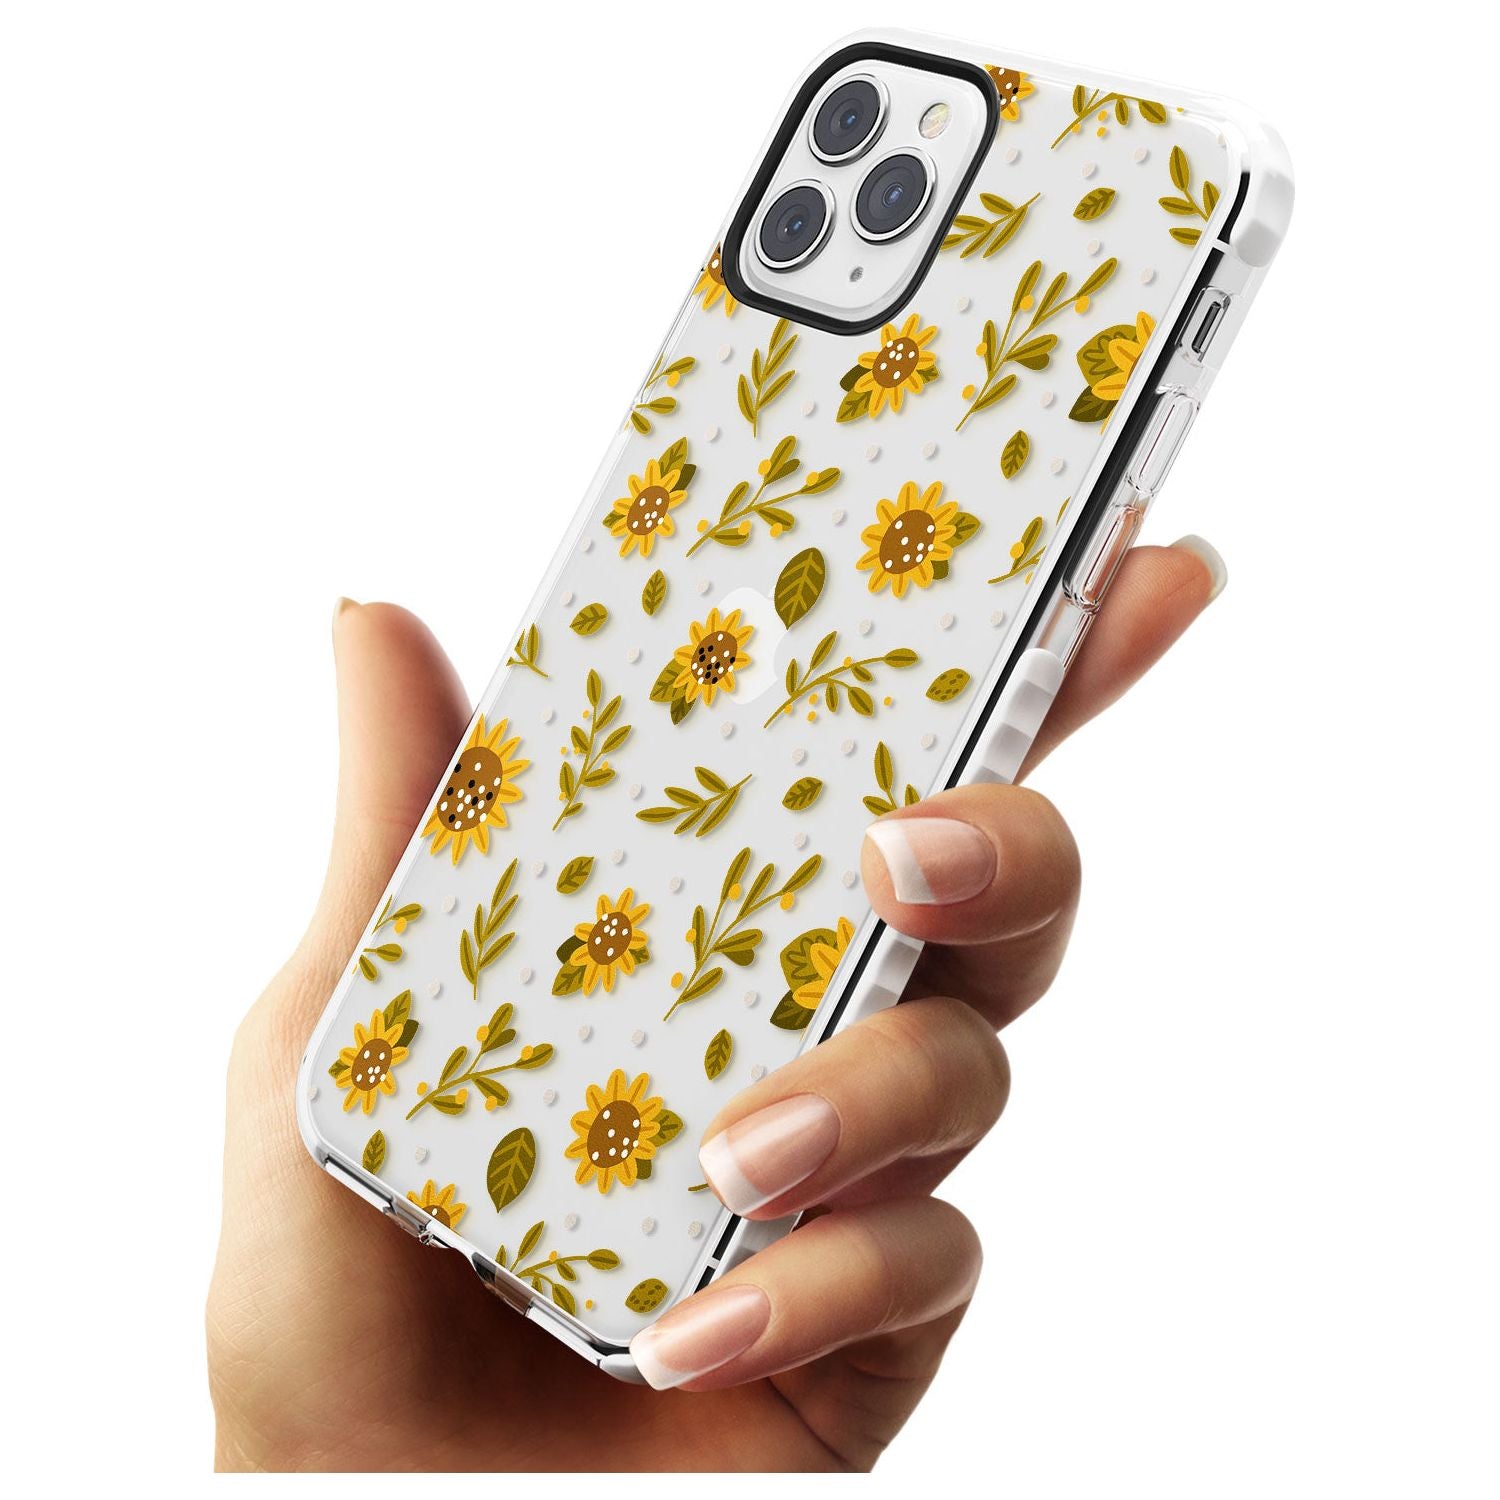 Sweet as Honey Patterns: Sunflowers (Clear) Impact Phone Case for iPhone 11 Pro Max